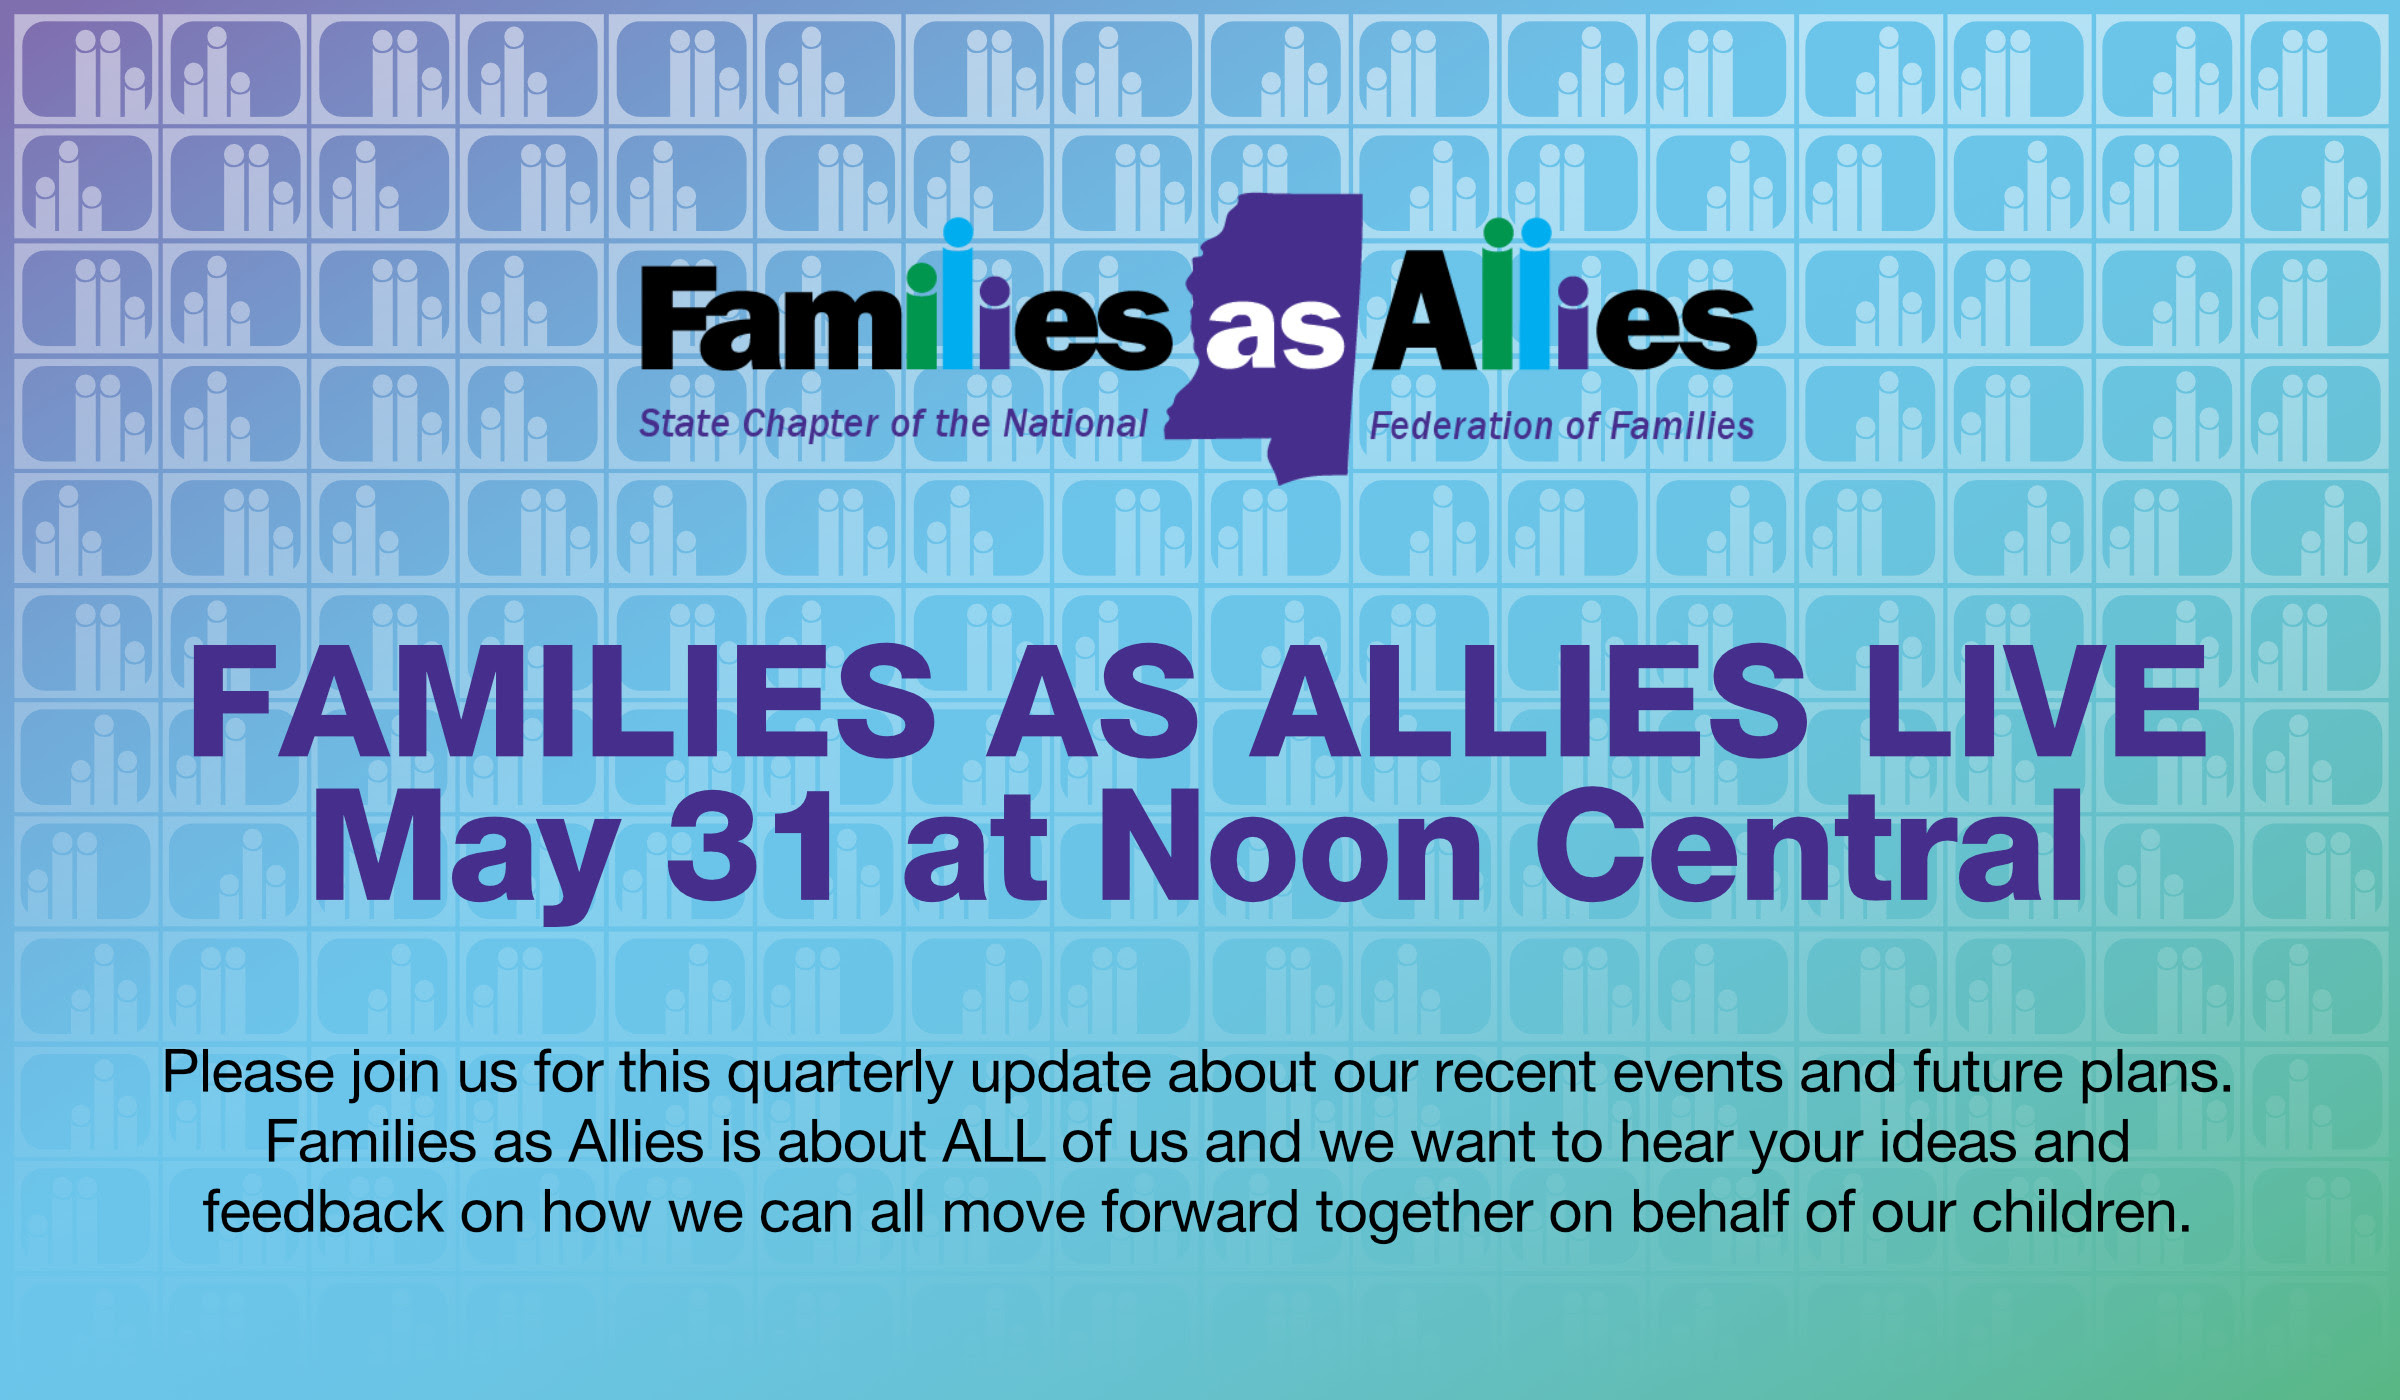 Families As Allies FB and Youtube live event flyer listing the details.